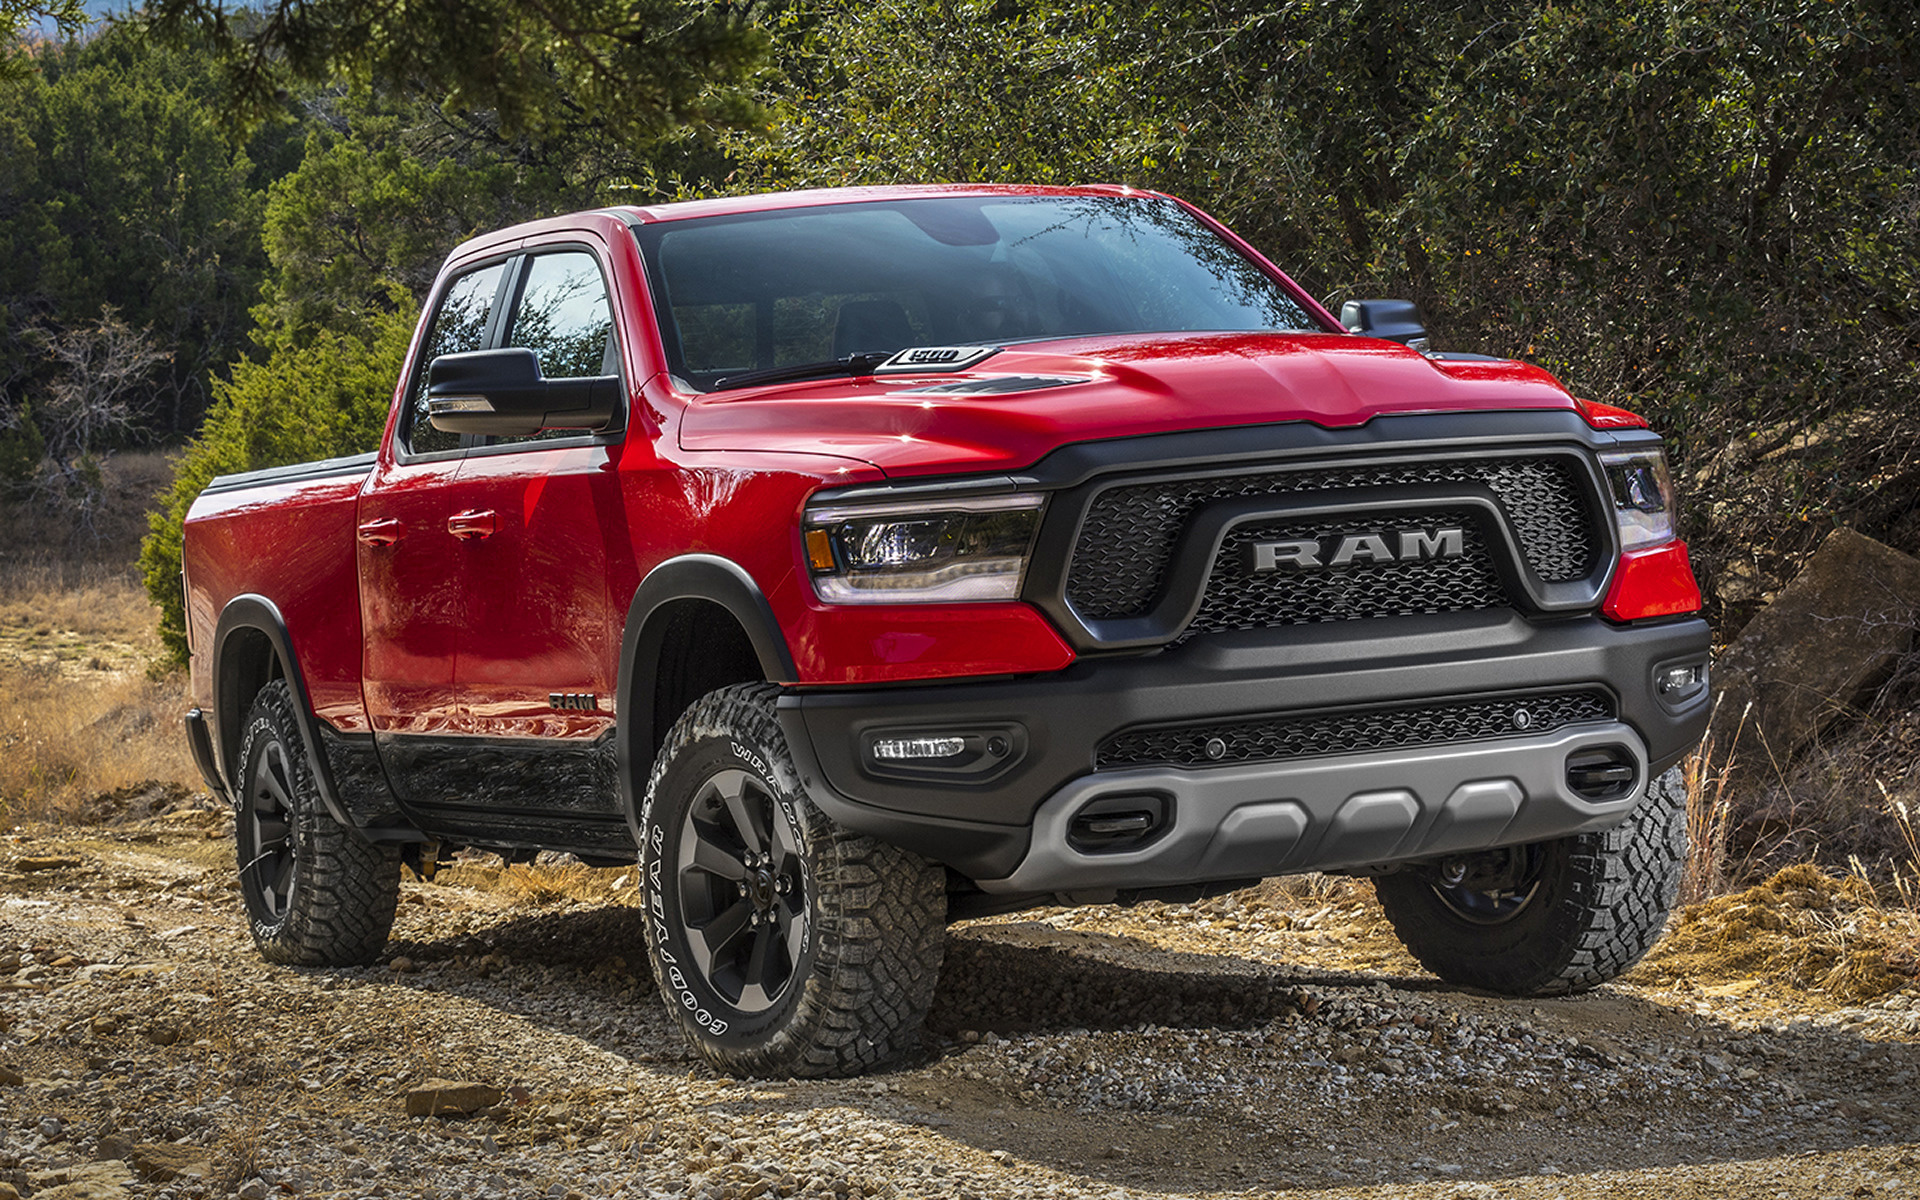 Free download ram rebel quad cab wallpapers and hd images car pixel x for your desktop mobile tablet explore ram rebel wallpapers rebel flag backgrounds rebel wallpaper dodge ram wallpaper